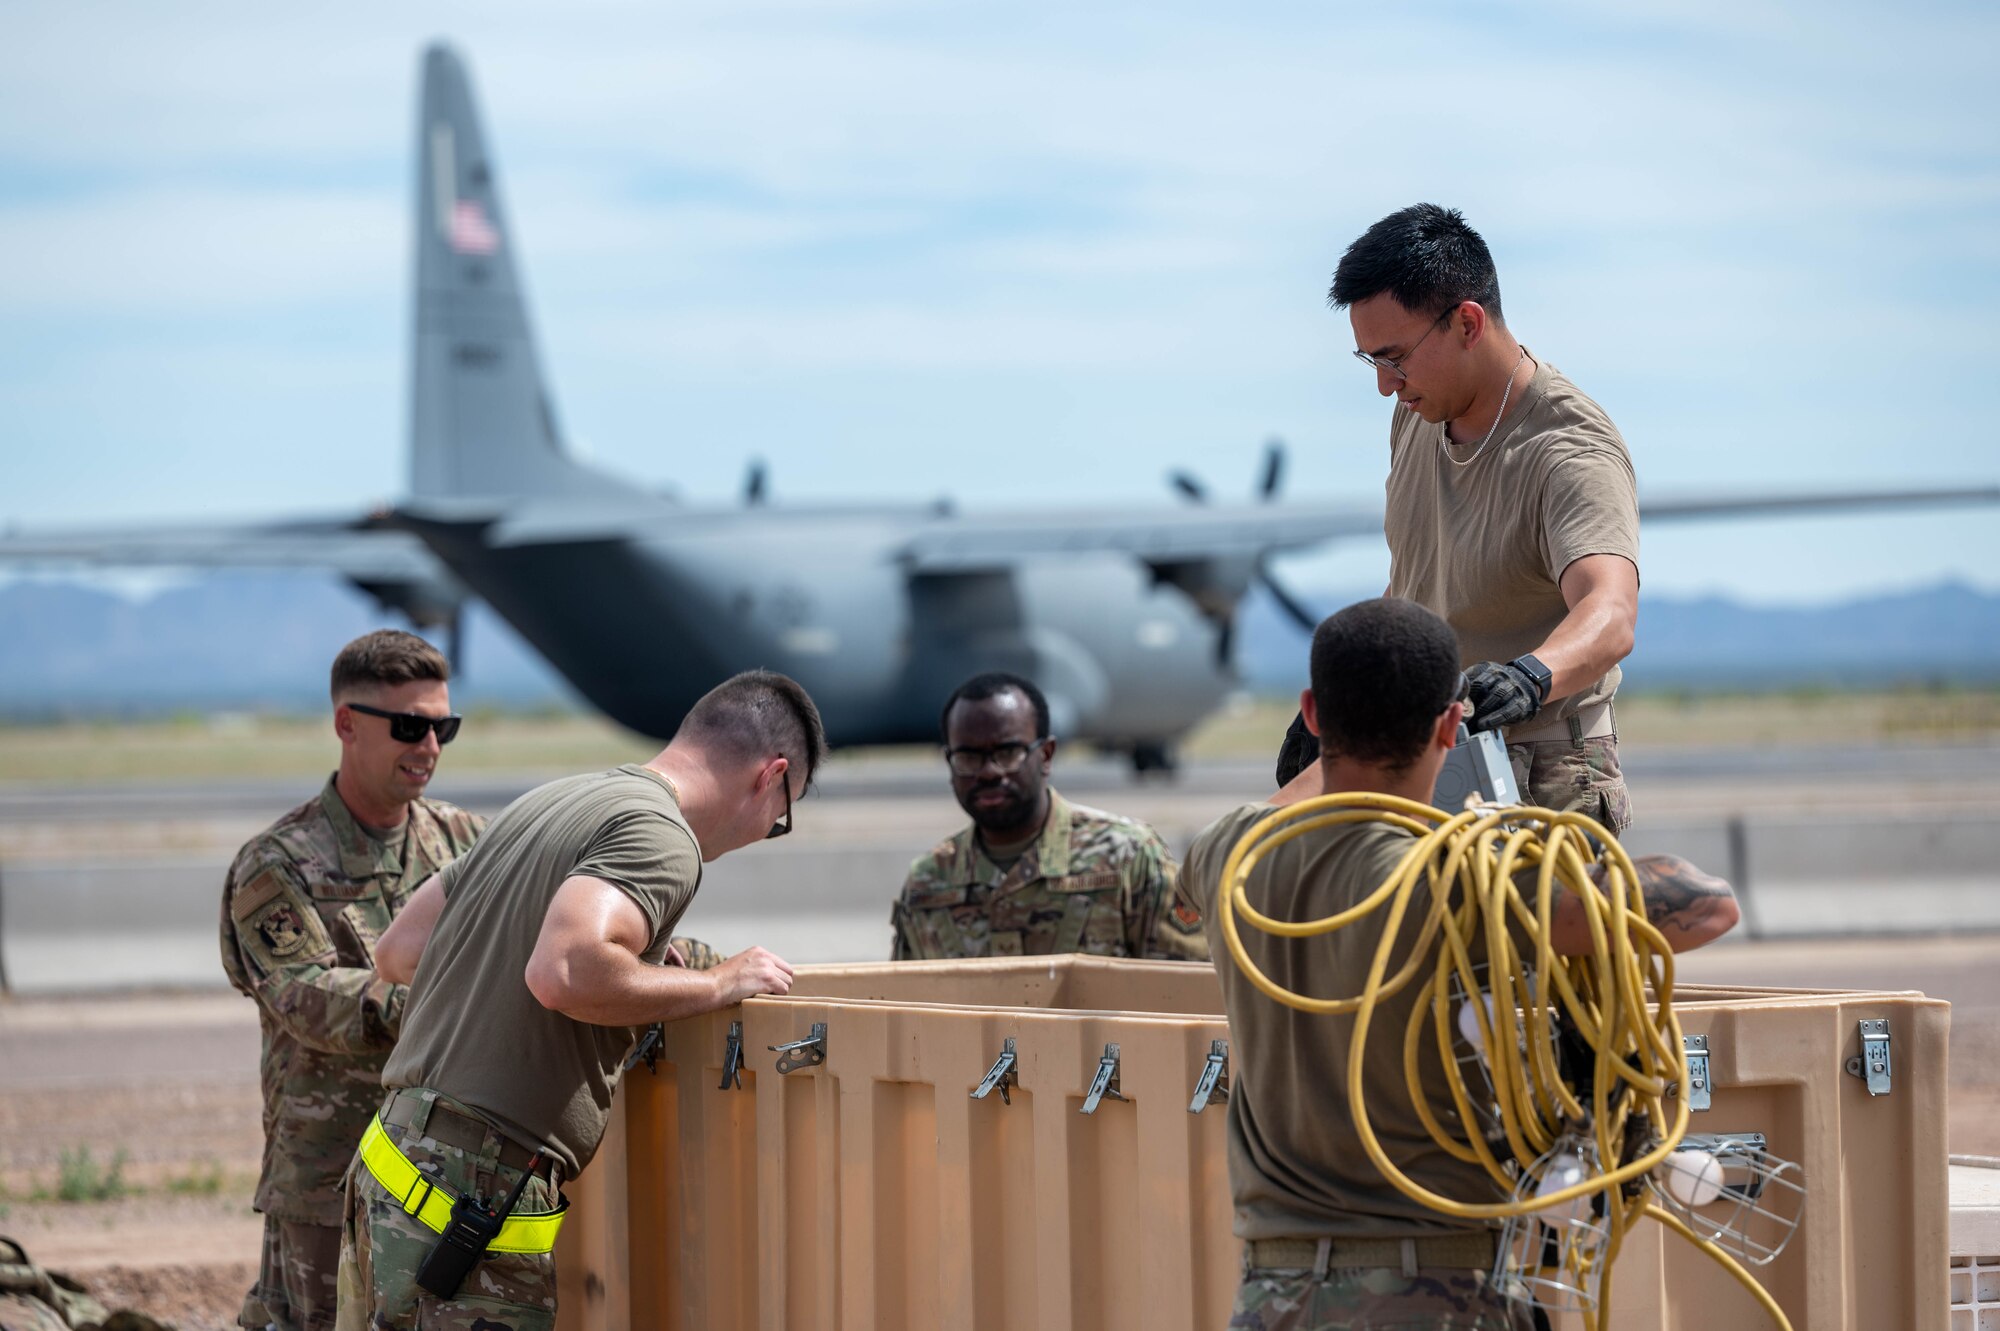 U.S. Air Force Airmen assigned to the 56th Fighter Wing unload cargo during exercise Wild Coyote, April 12, 2023 at Gila Bend Air Force Auxiliary Field, Arizona.